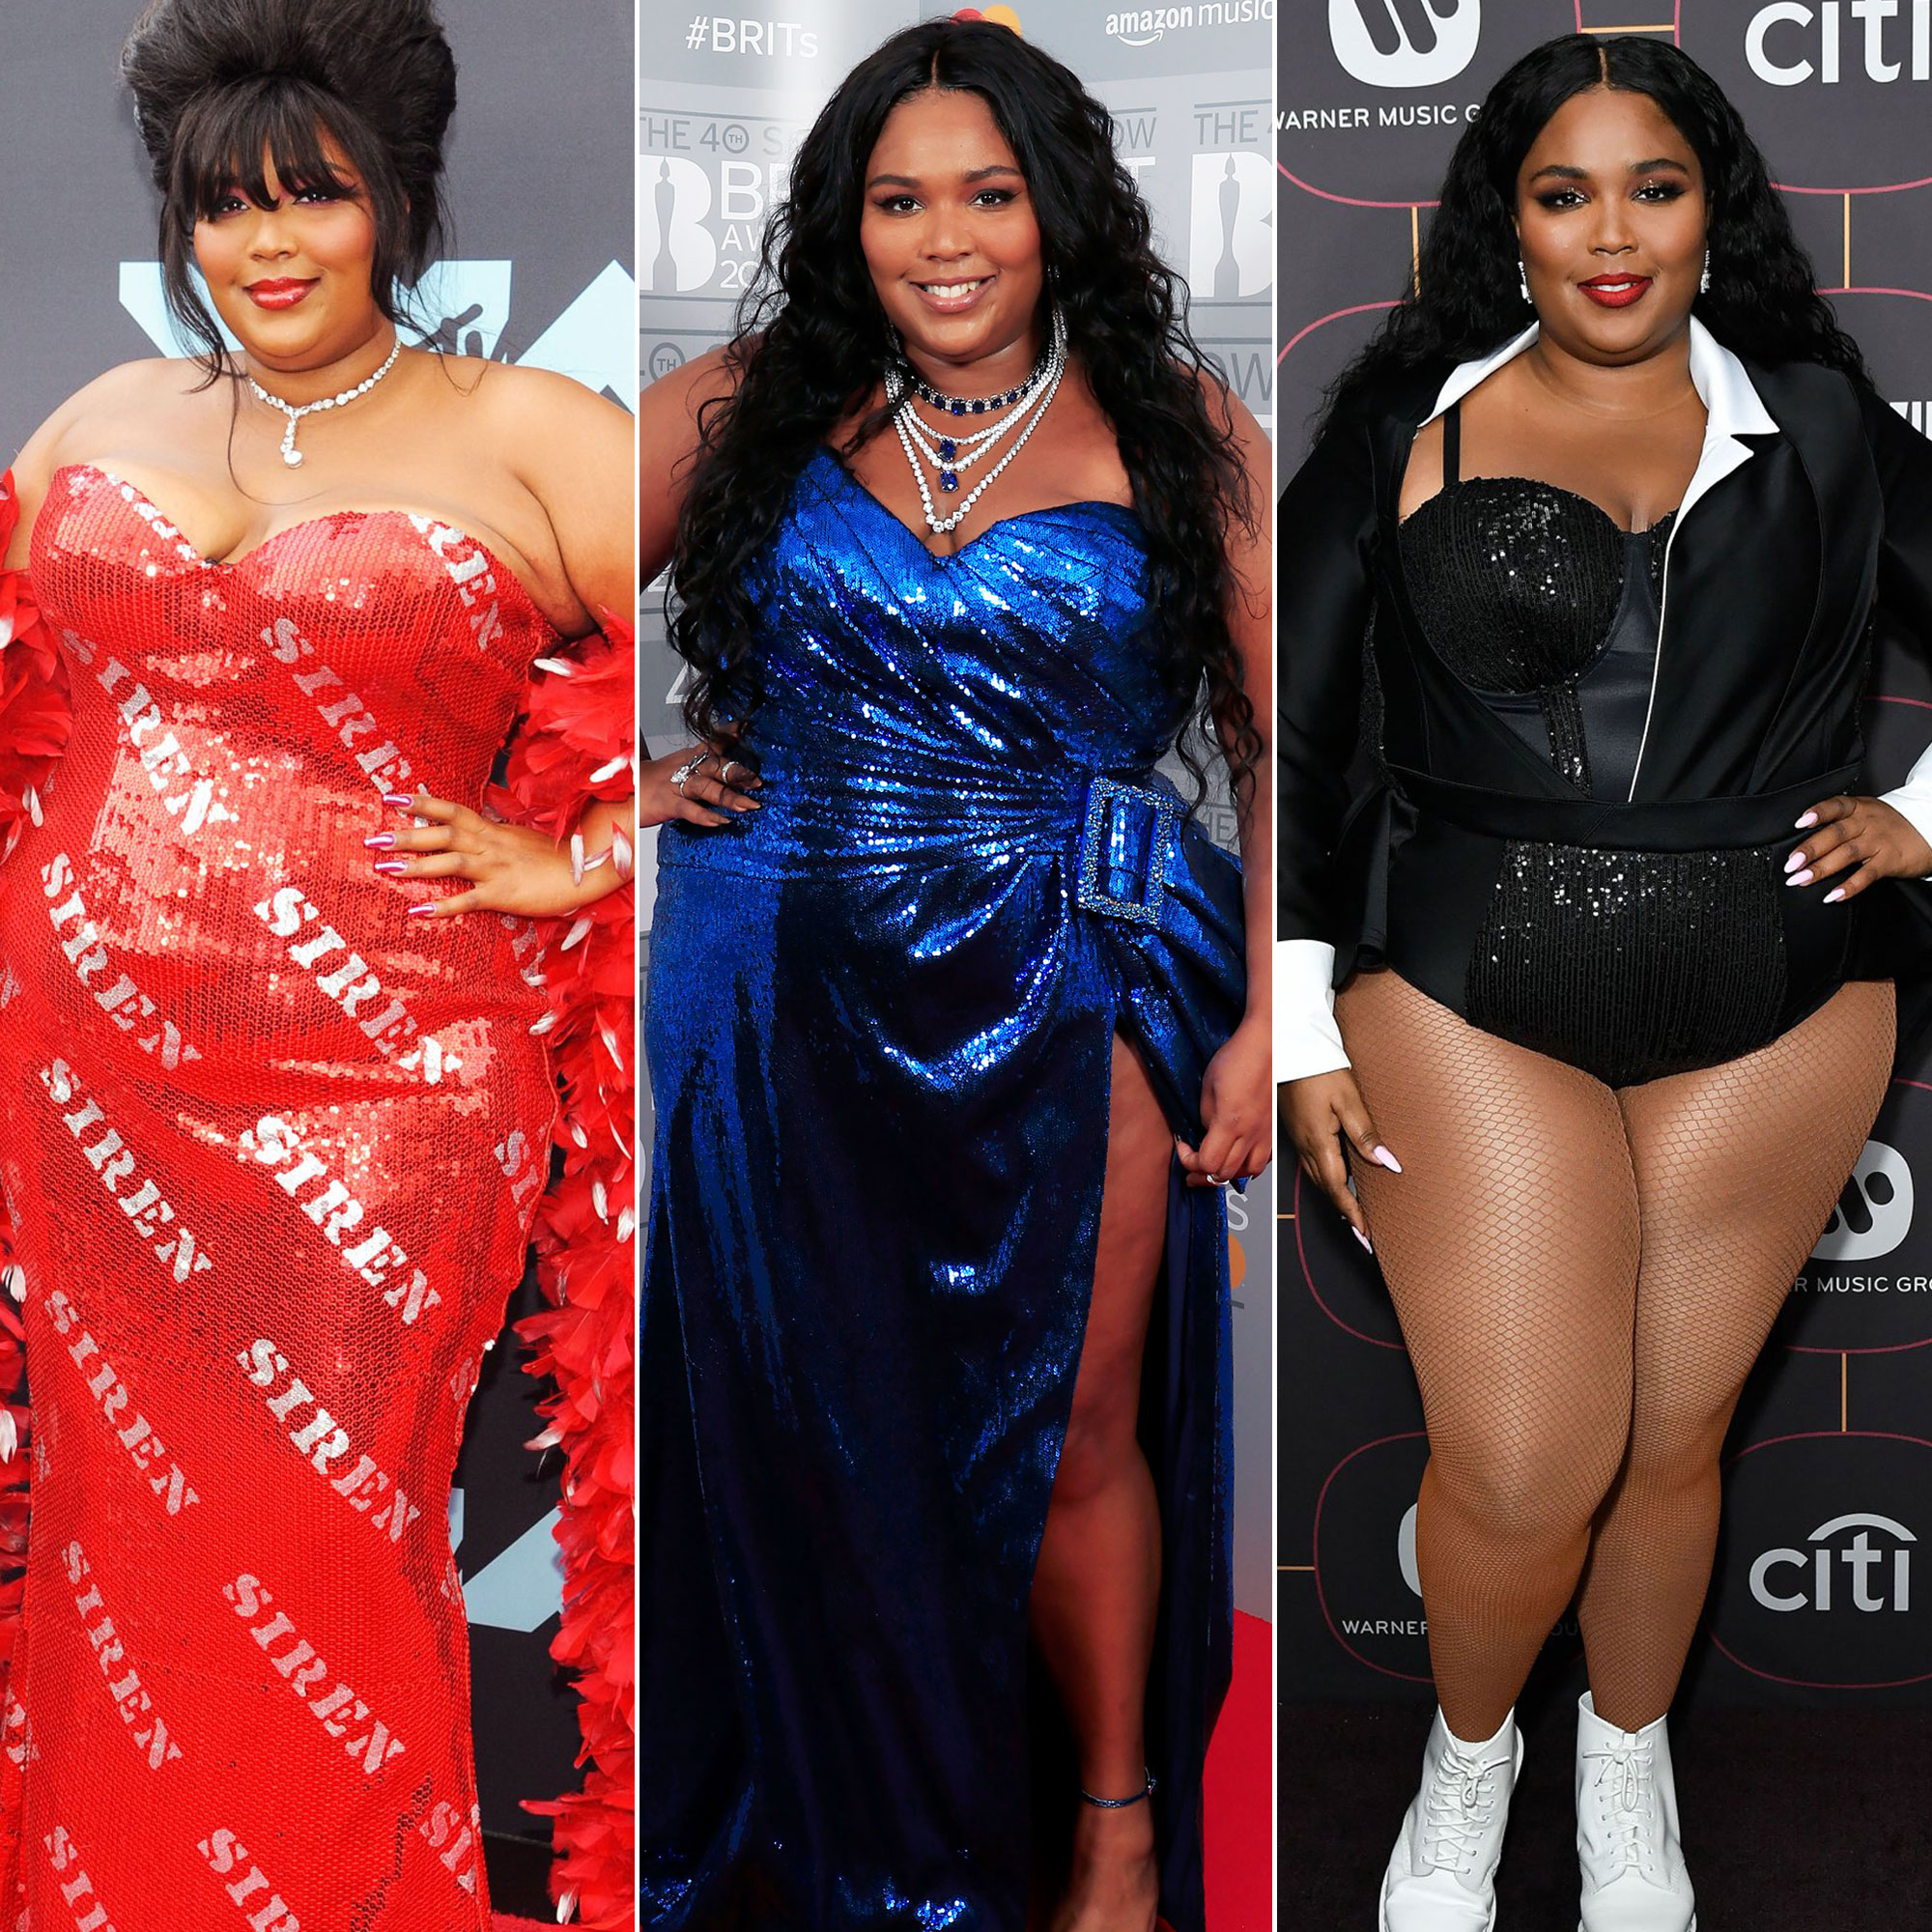 https://www.usmagazine.com/wp-content/uploads/2020/05/Lizzo-Style-File-Feature.jpg?quality=40&strip=all